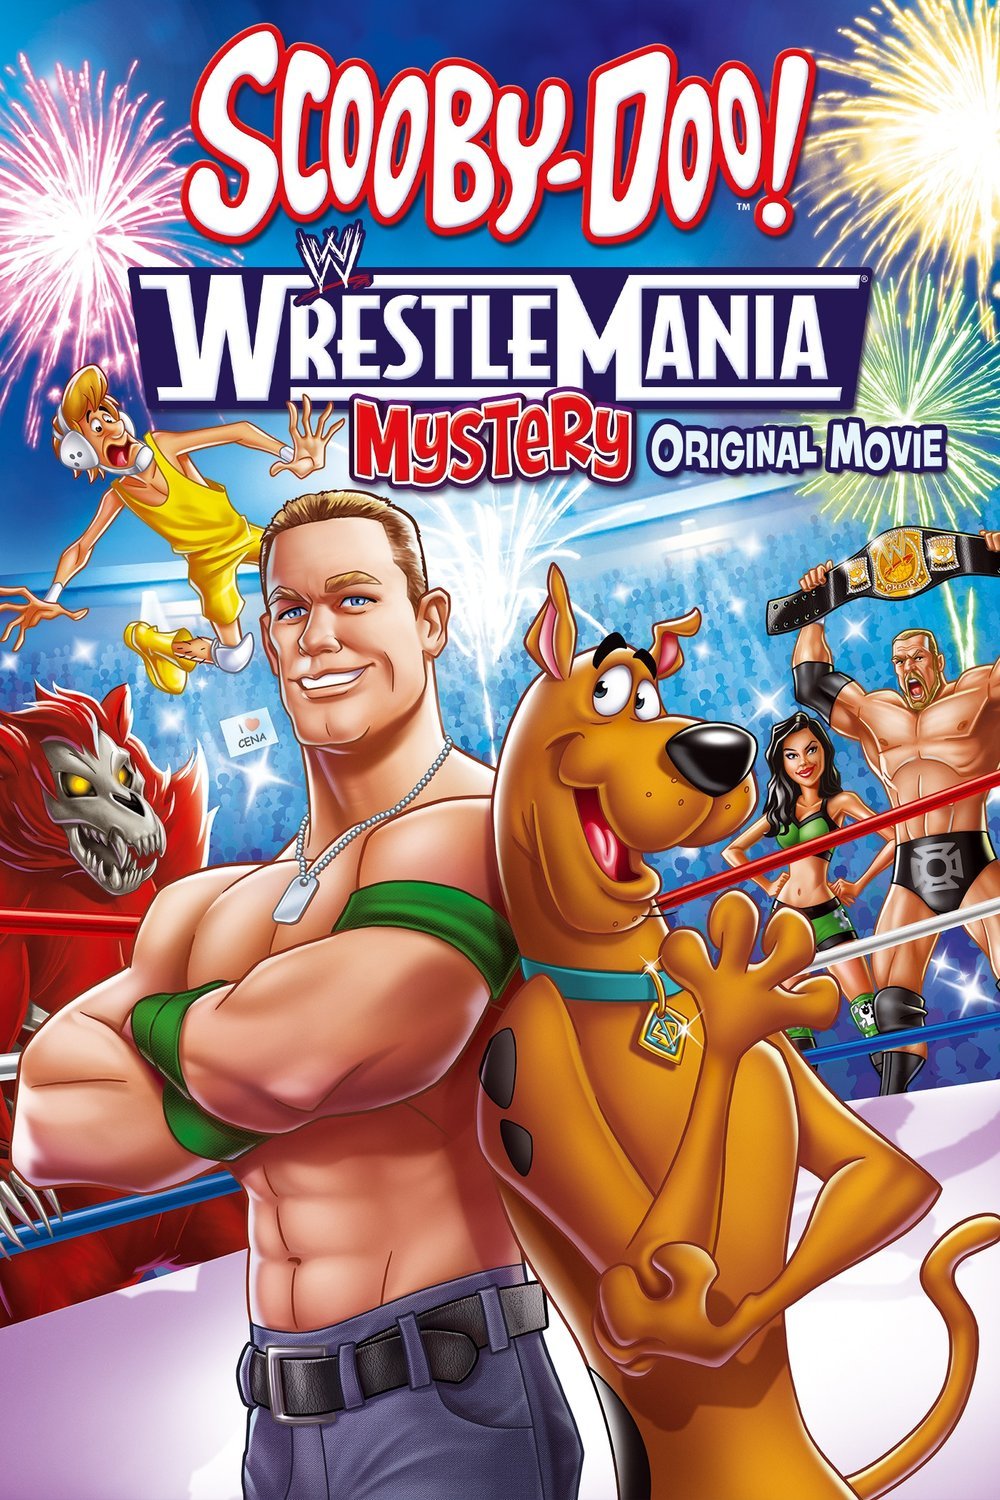 Poster of the movie Scooby-Doo! WrestleMania Mystery